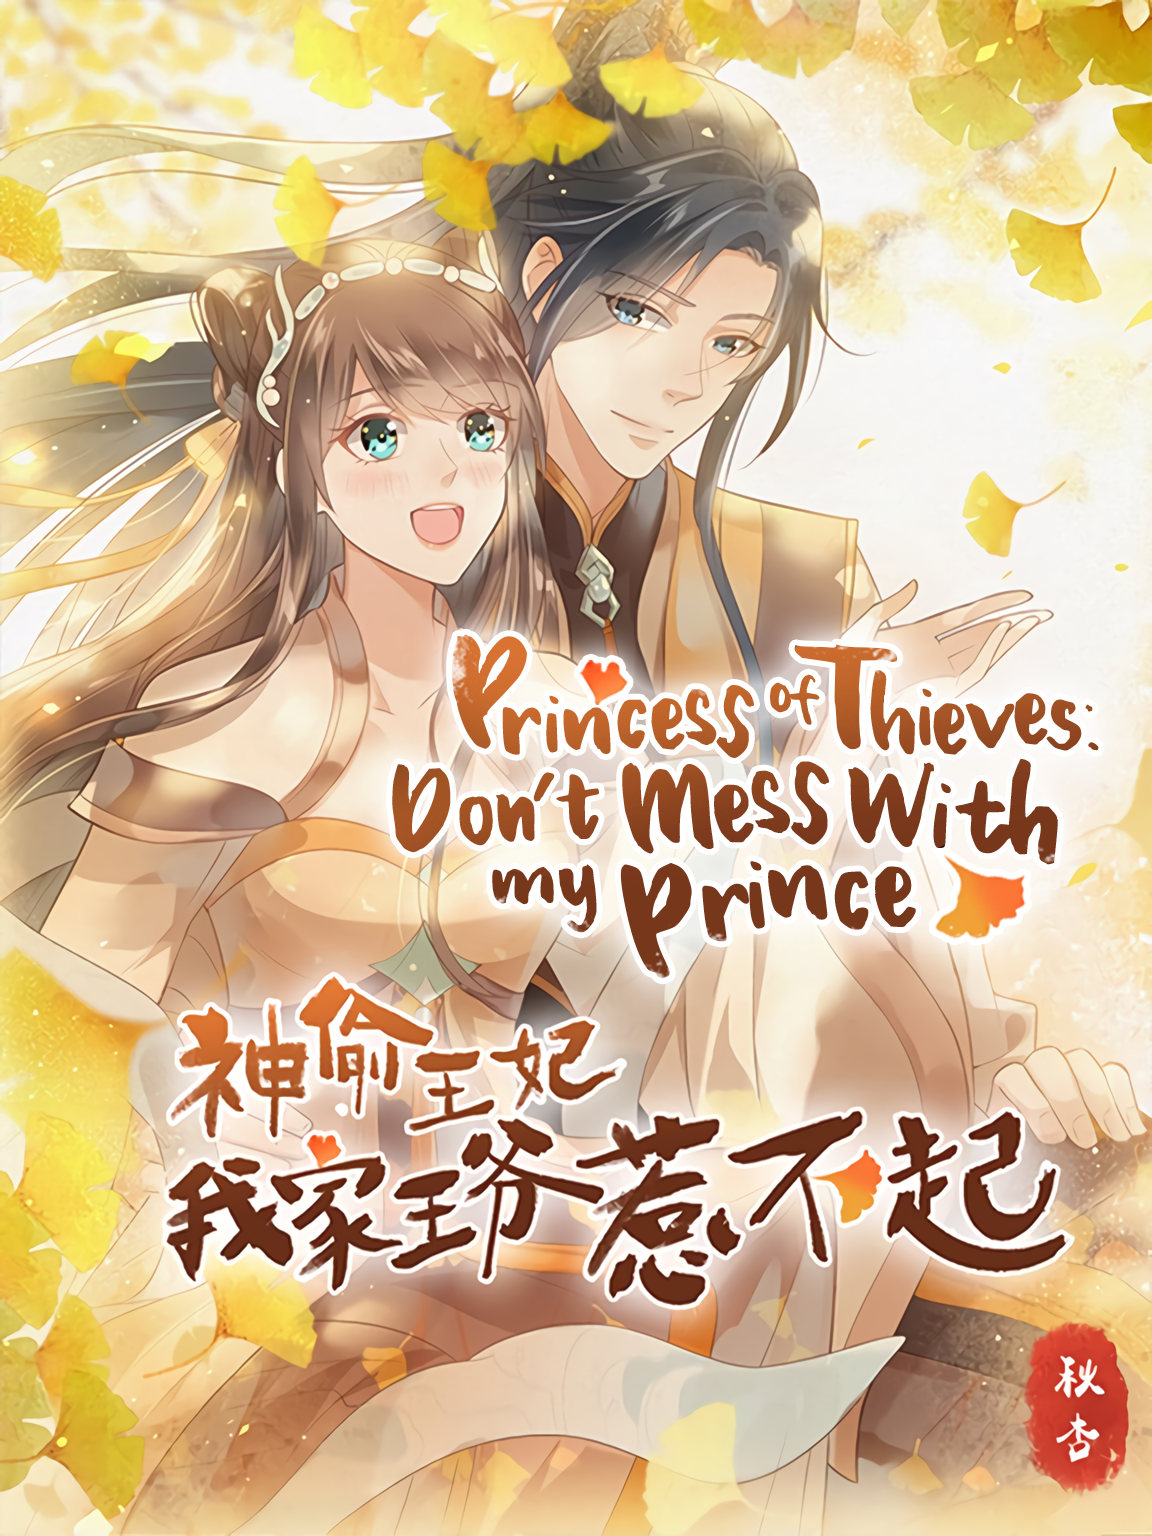 Princess Of Thieves: Don't Mess With My Prince read comic online - BILIBILI  COMICS